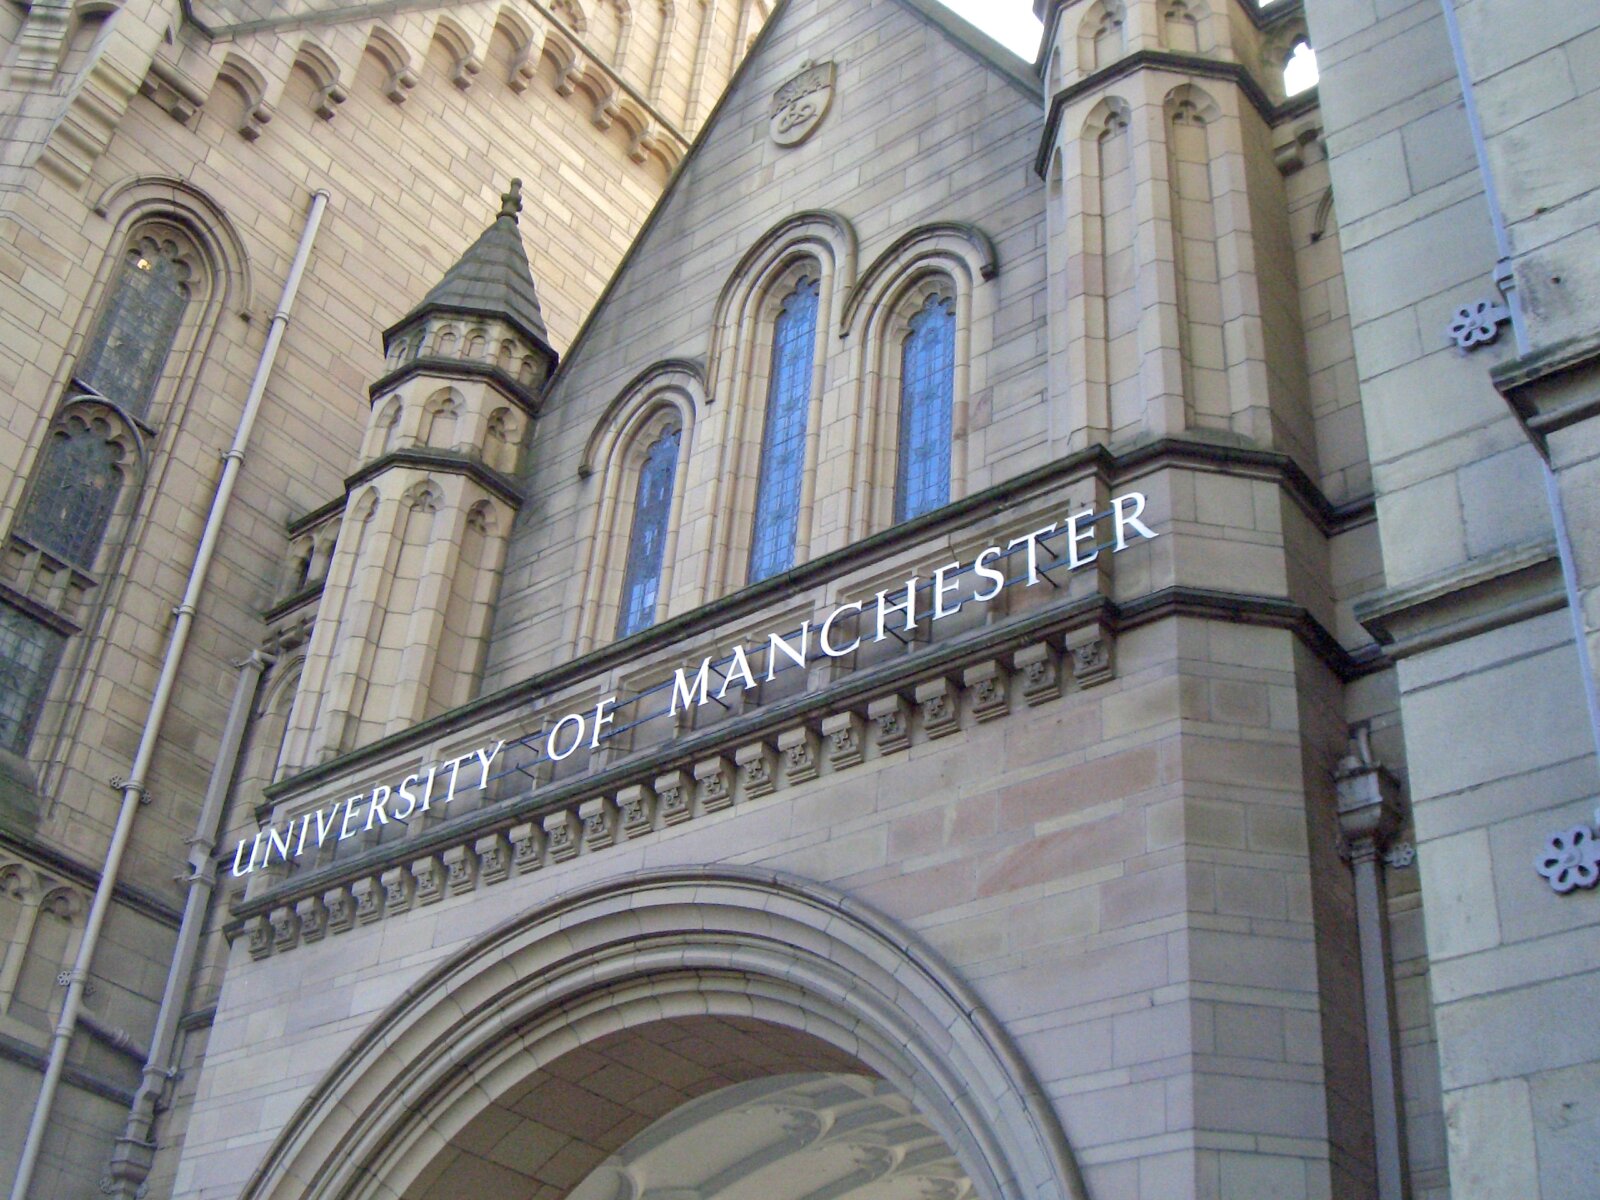 University of Manchester considering imposing curfew on students after &#8216;significant&#8217; COVID-19 breaches, The Manc